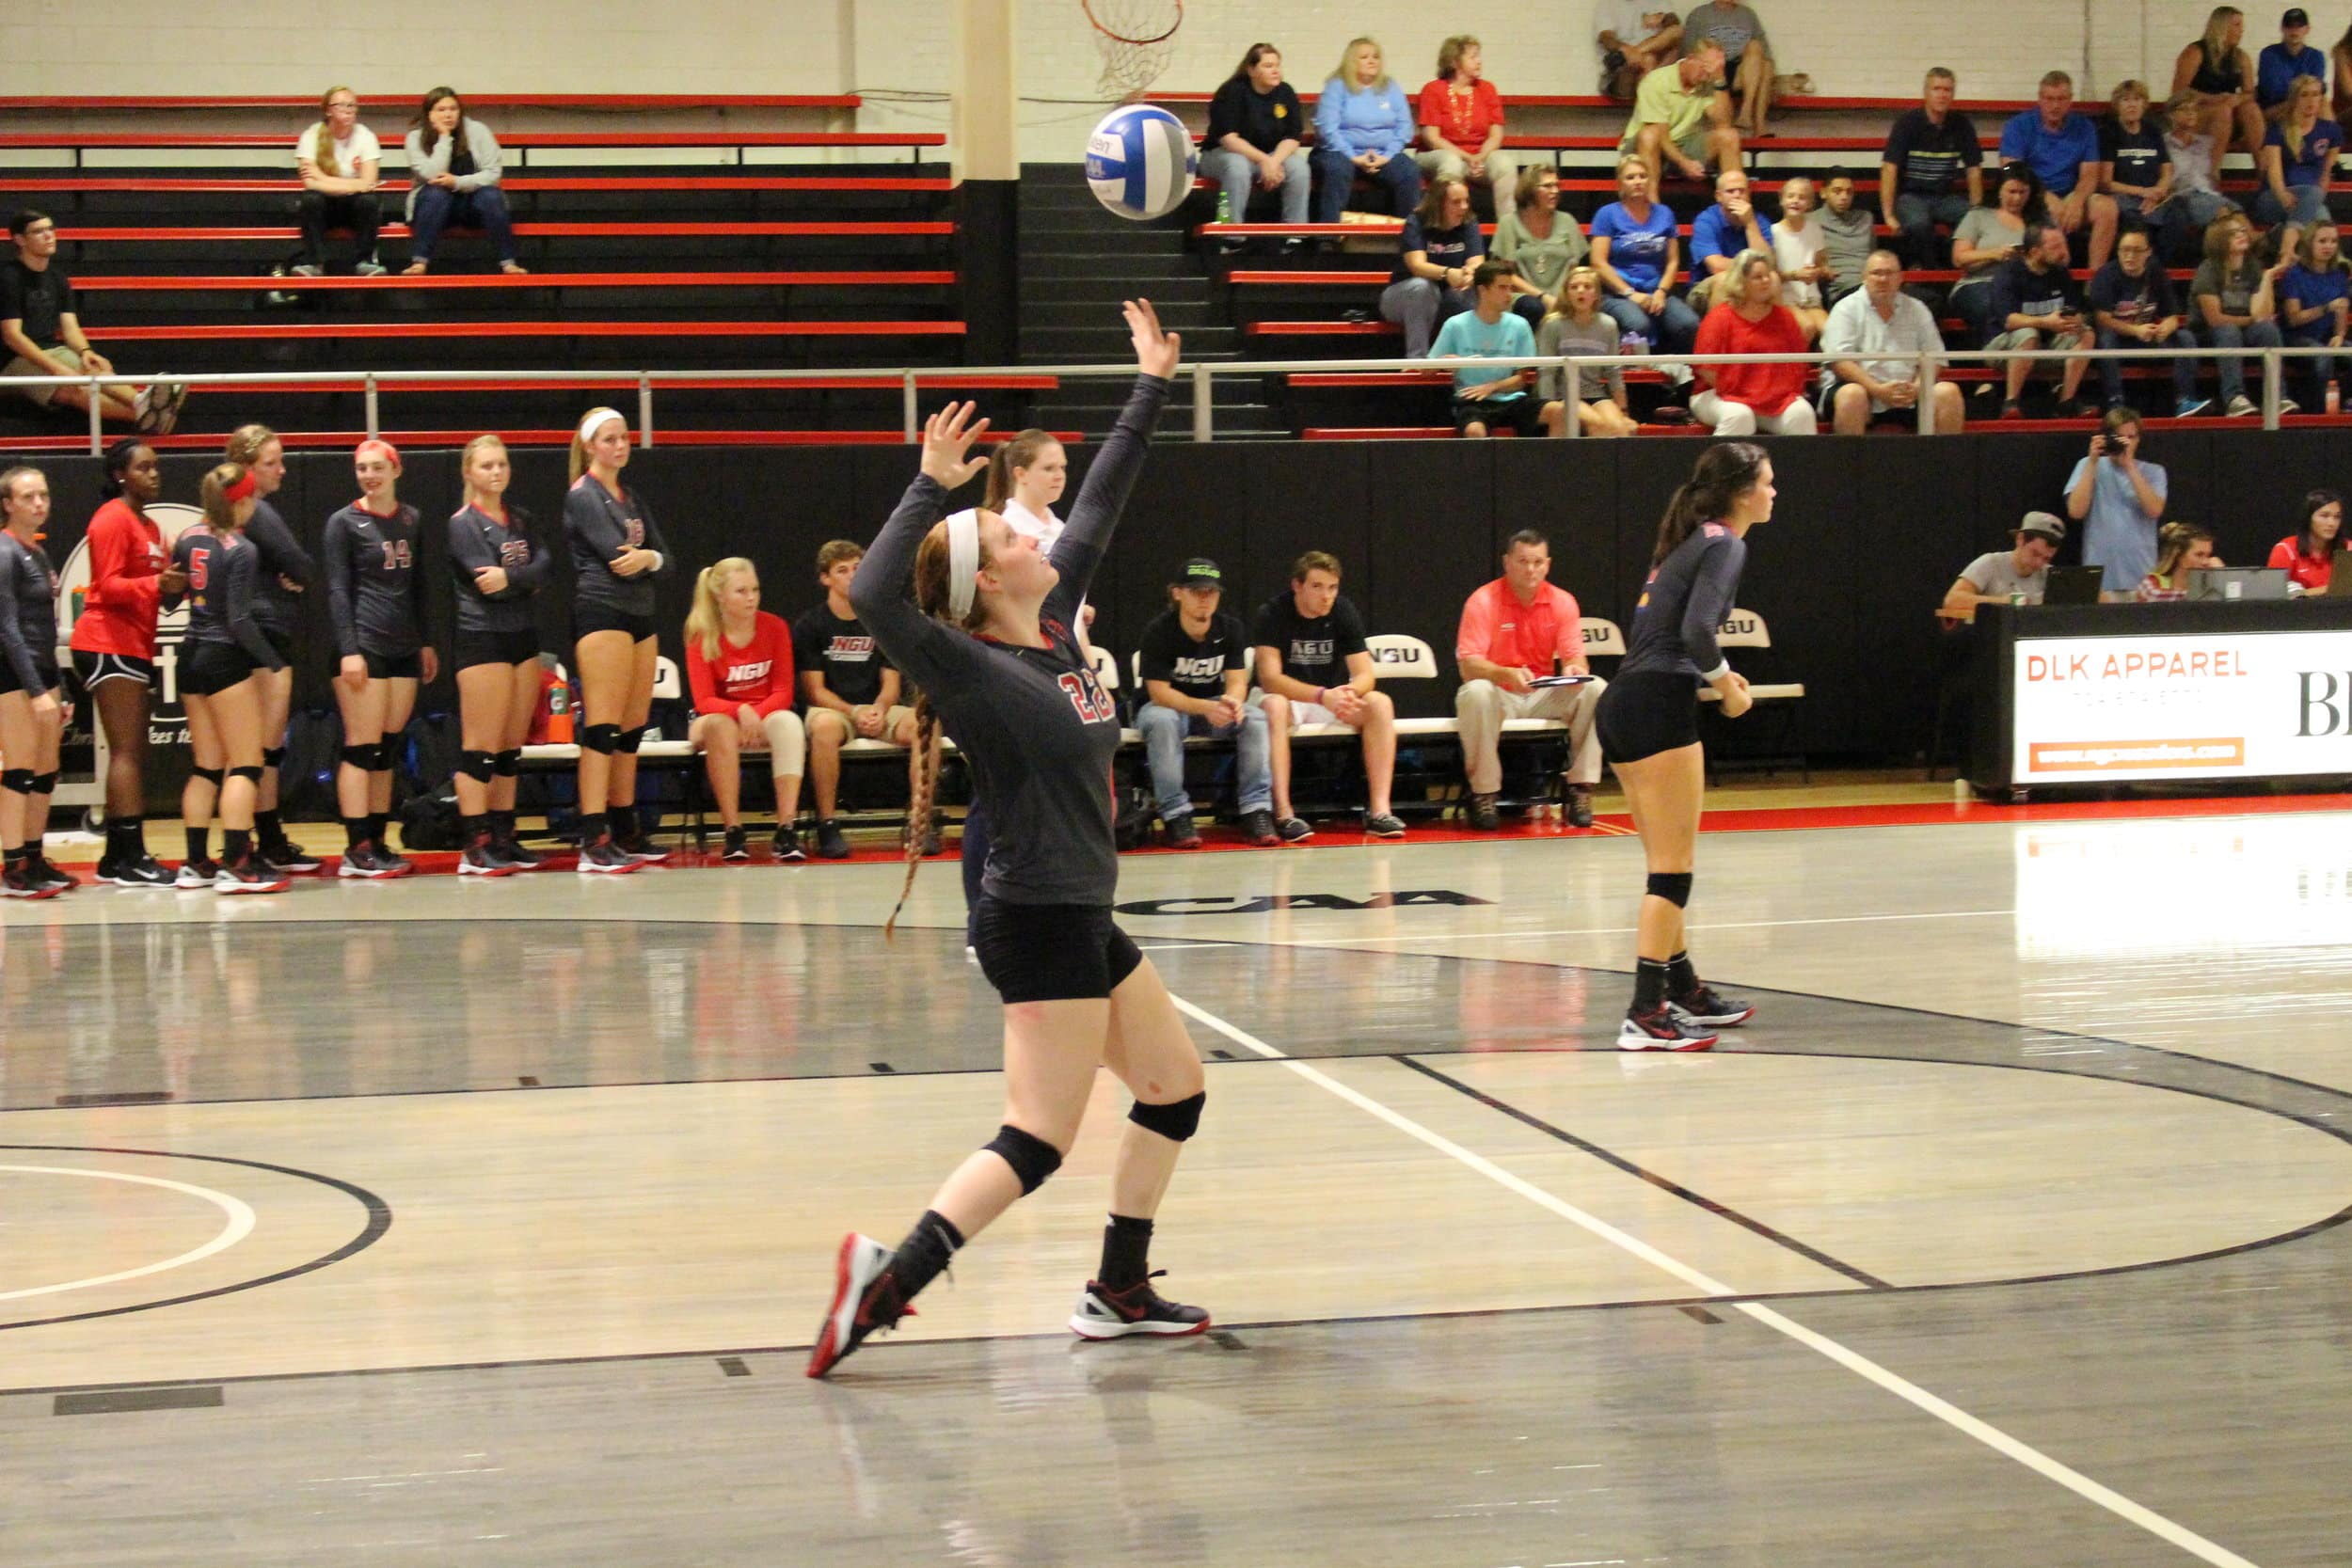  Madison Pogue serves the ball to gain the point.&nbsp; 